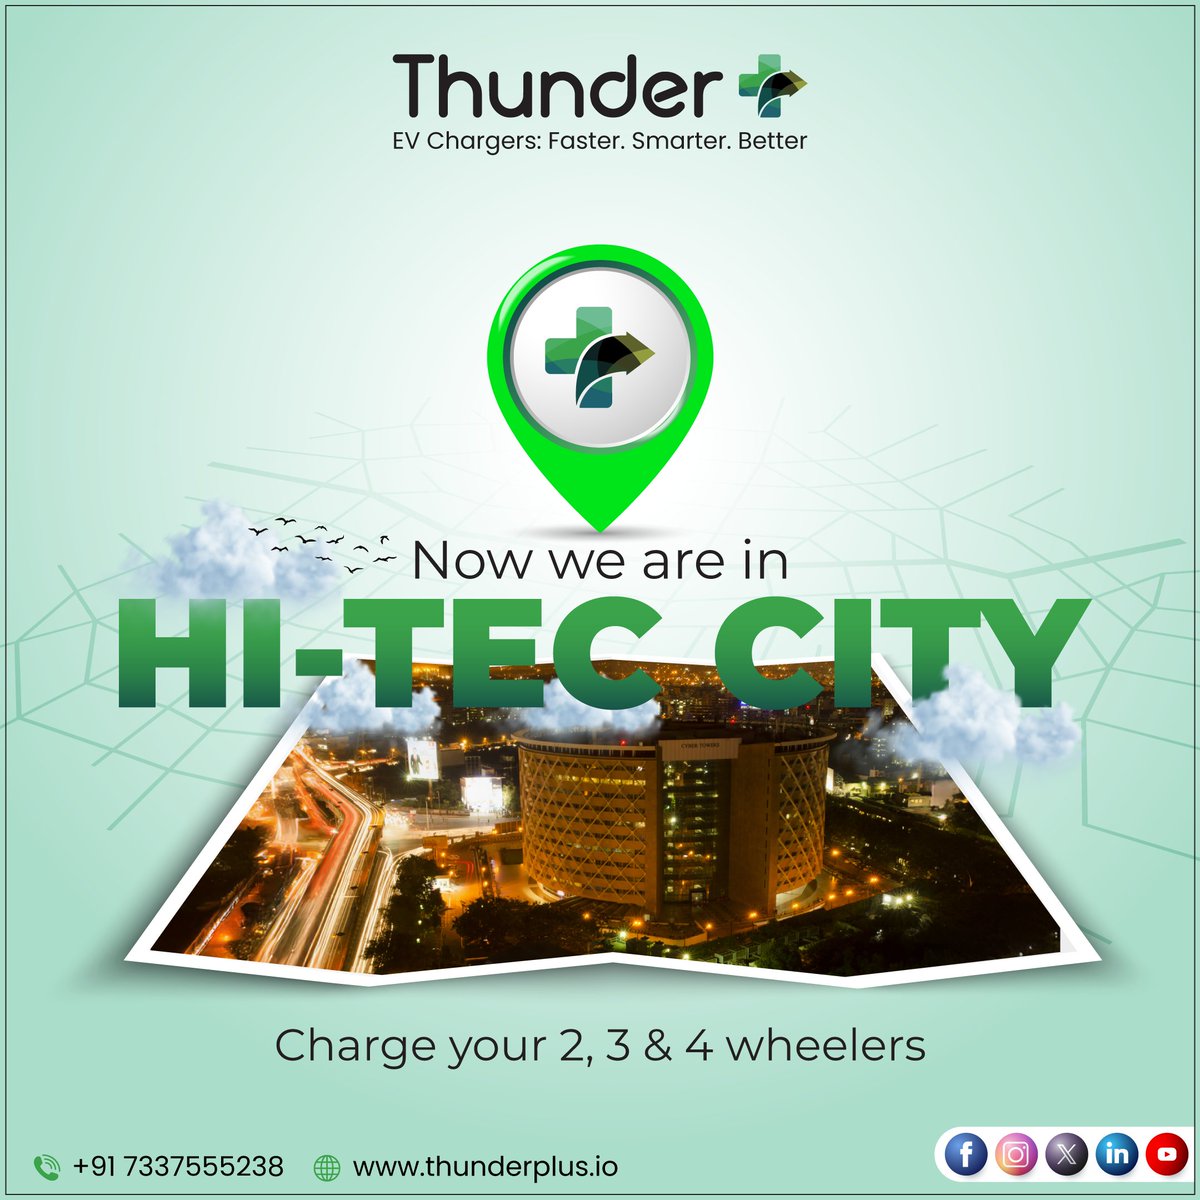 We're thrilled to announce our new ThunderPlus EV Charging Station in Hitec City, Hyderabad! Charge your 2, 3, and 4-wheelers with ease! 

Reach us at info@thunderplus.io or call us at 7337555238.

#ThunderPlus #EVCharging #ChargingStation #GrandOpening #HitecCity #Hyderabad